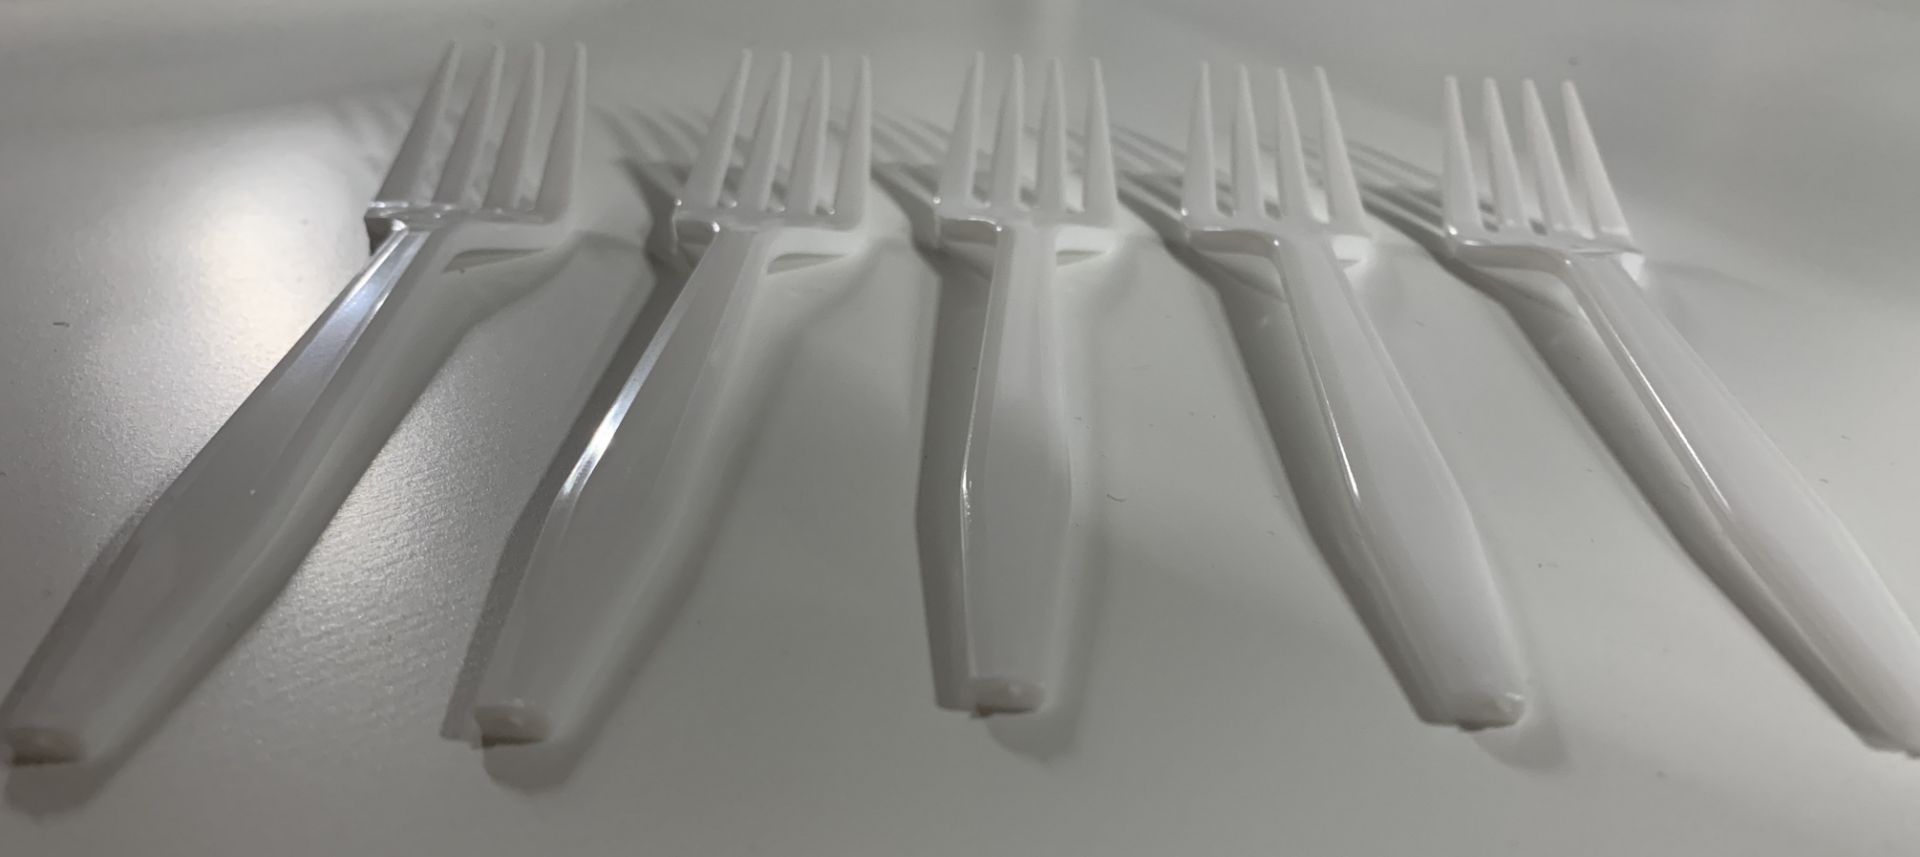 1 x Box of 1000 Mini Forks by 888 Gastro Disposables - Image 2 of 5